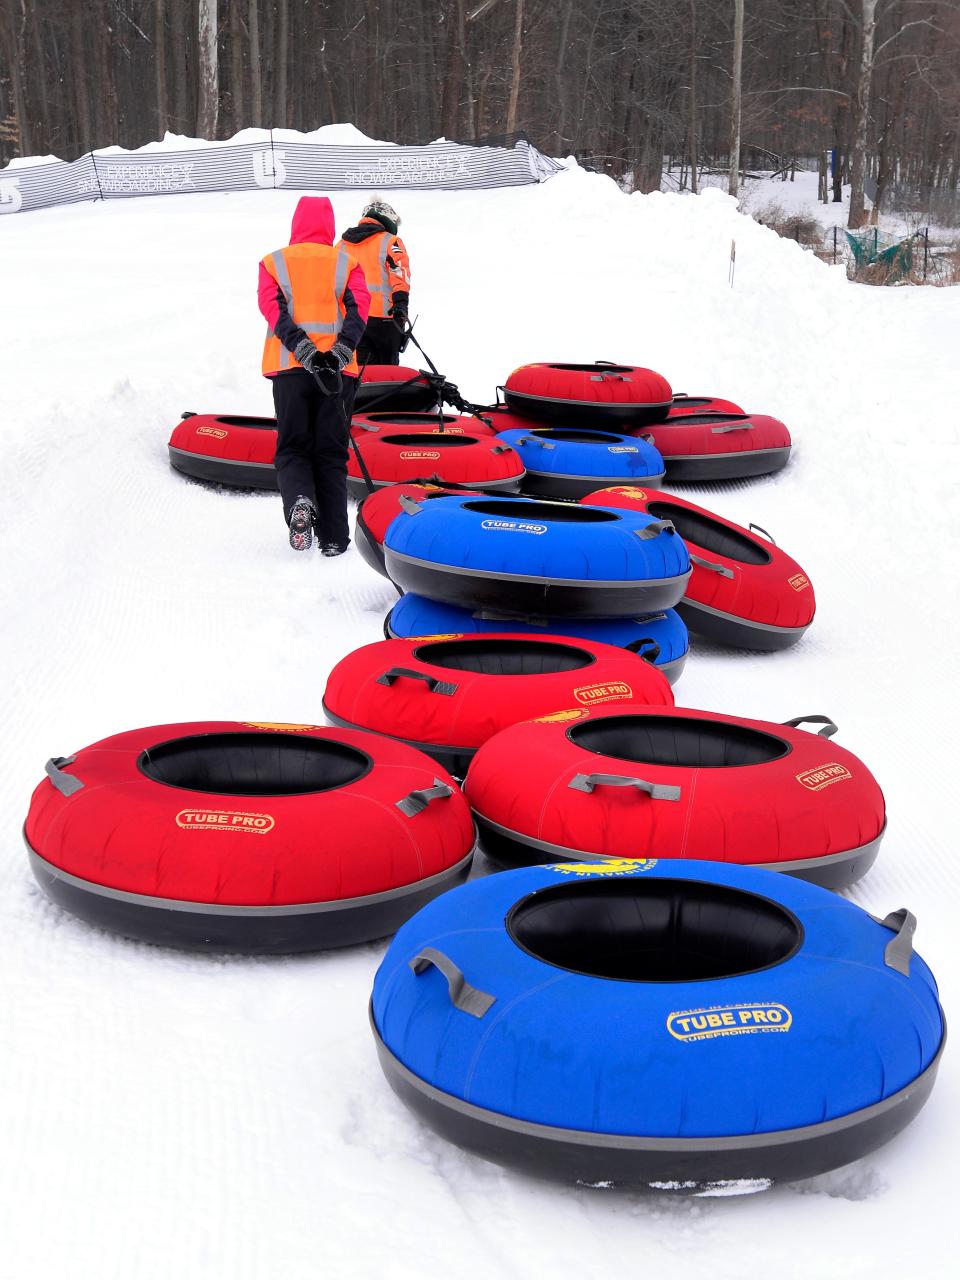 There are snow tubing runs in Traverse City, Bellaire and Shelby Township. Find one closer to home at Hawk Island in Lansing, pictured above.